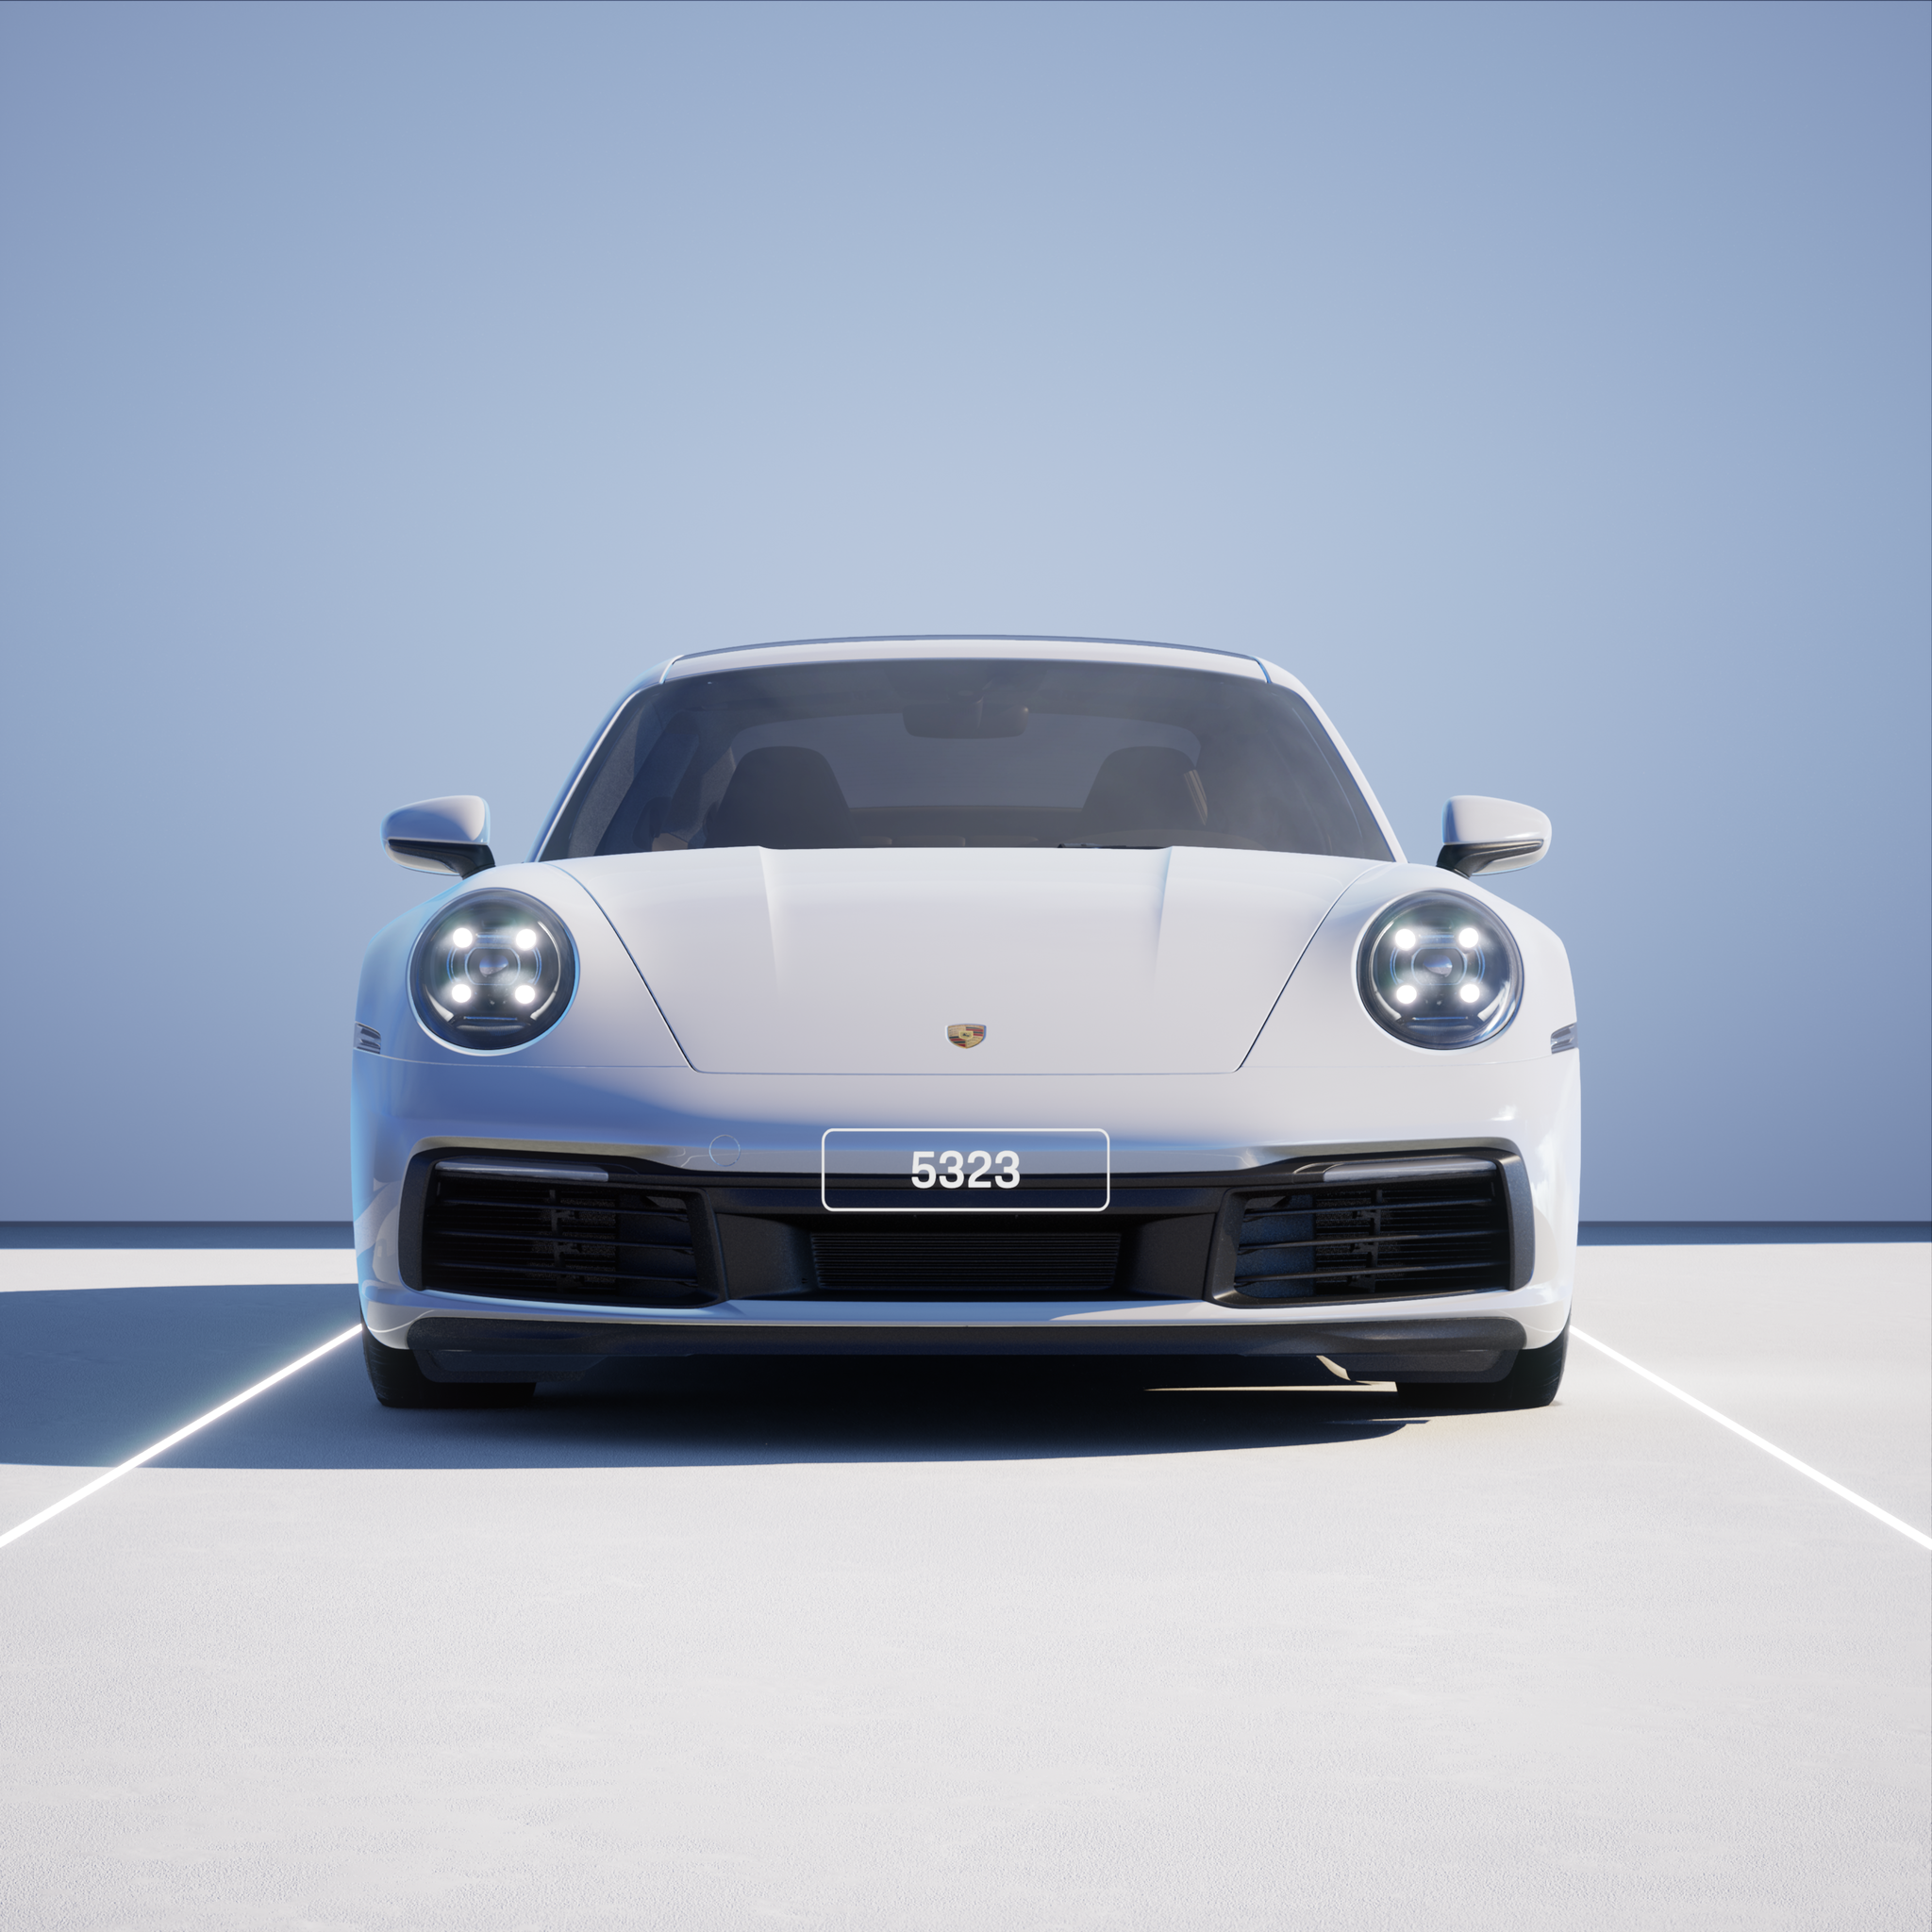 The PORSCHΞ 911 5323 image in phase